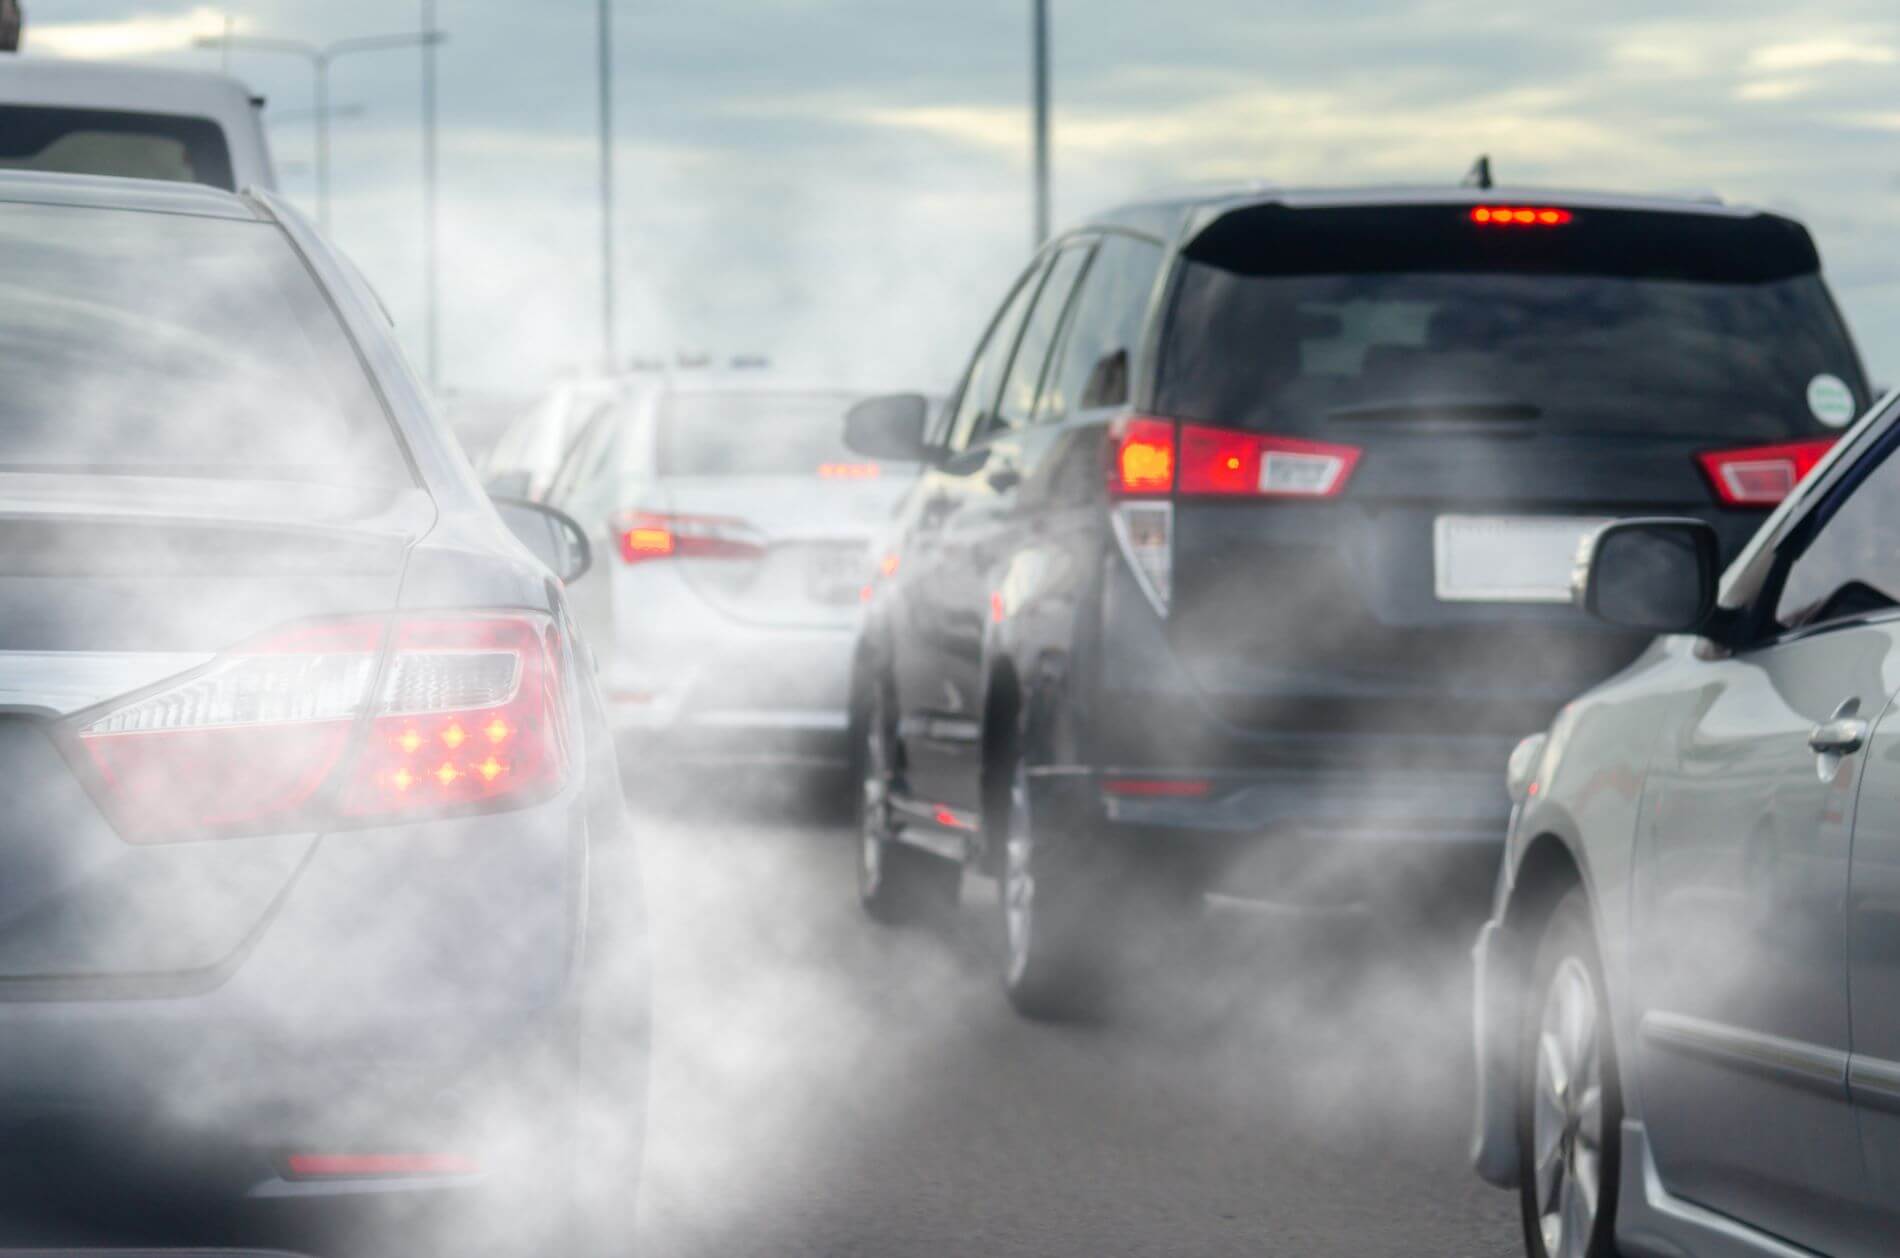 Air pollution around cars on a highway.